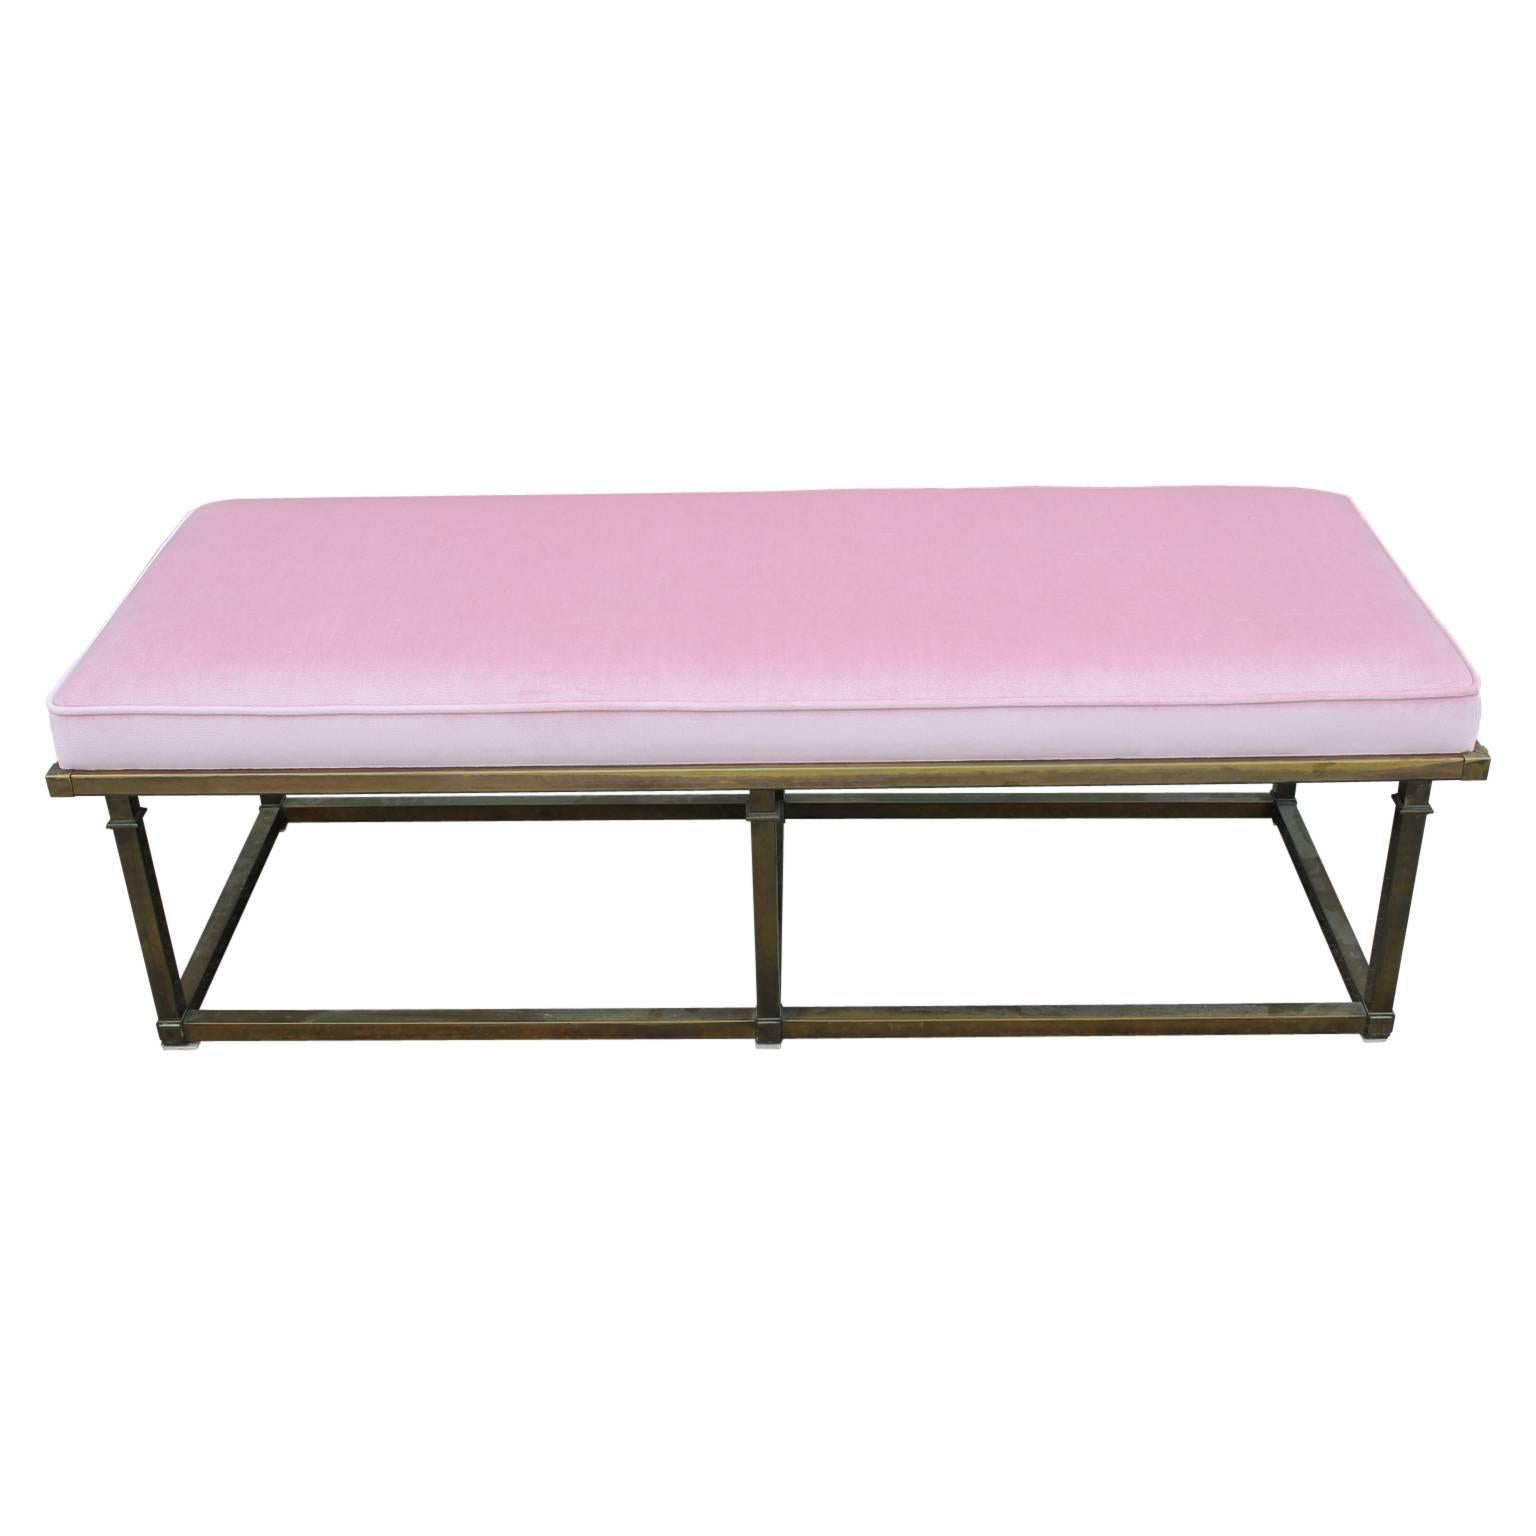 Recently reupholstered brass and light pink velvet Mastercraft bench. Sure to add sophistication to any home!